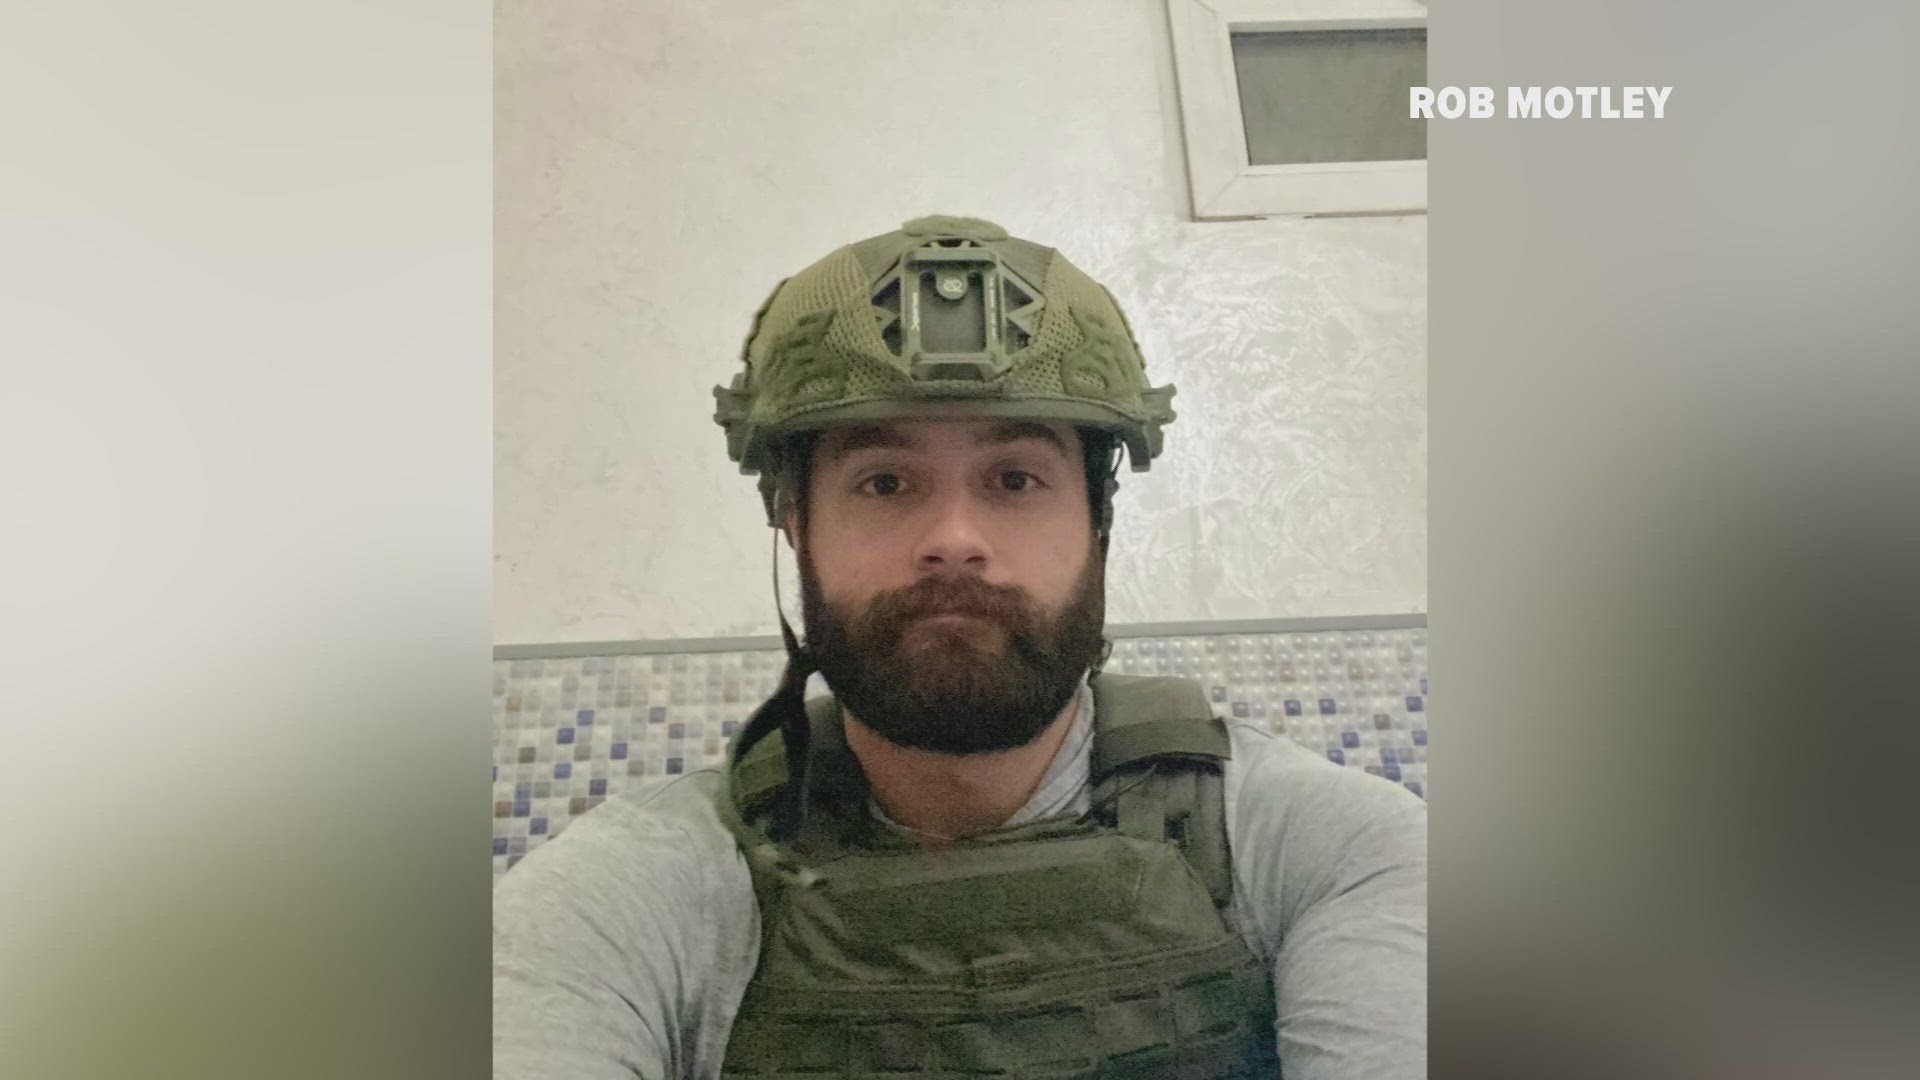 Rob Motley wanted to put his occupational therapy master's degree to use, and felt compelled to help Ukrainian soldiers.